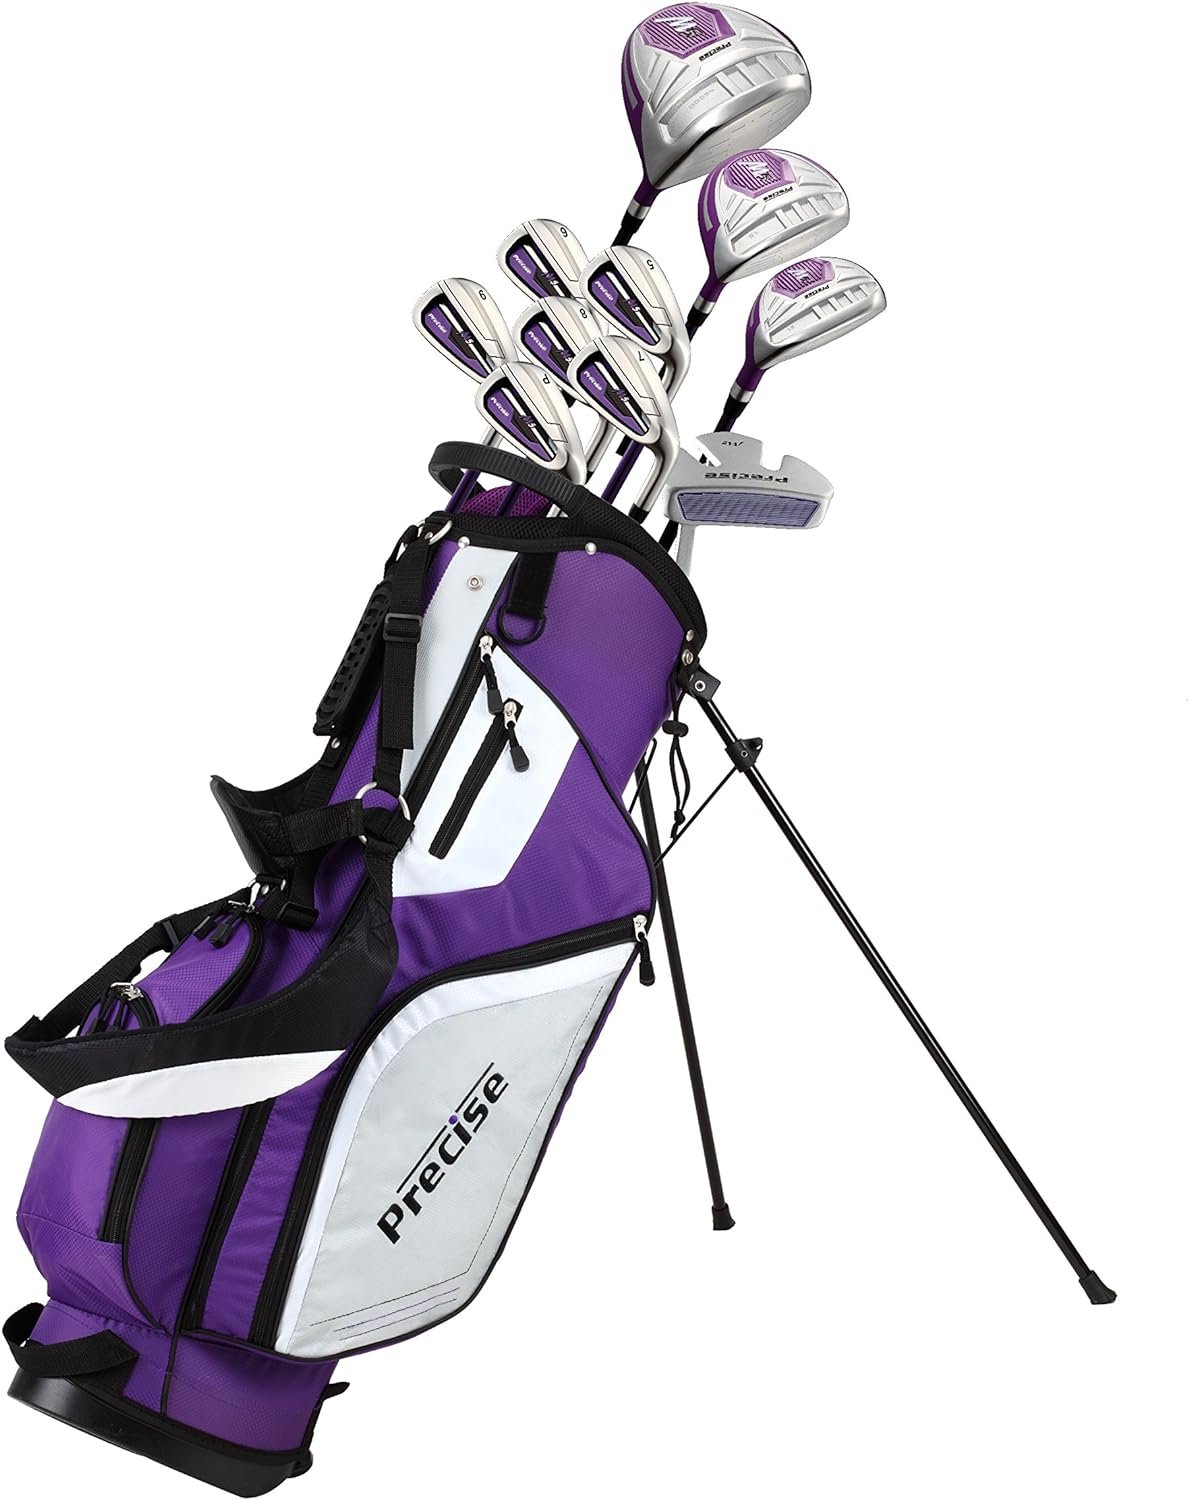 Precise Top Line Ladies Purple Right Handed M5 Golf Club Set, 460cc Driver, 3 Wood, 21* Hybrid, 5, 6, 7, 8, 9, PW Stainless Steel Irons, Putter, Graphite Shafts for Woods  Irons +Stand Bag + 3 Covers